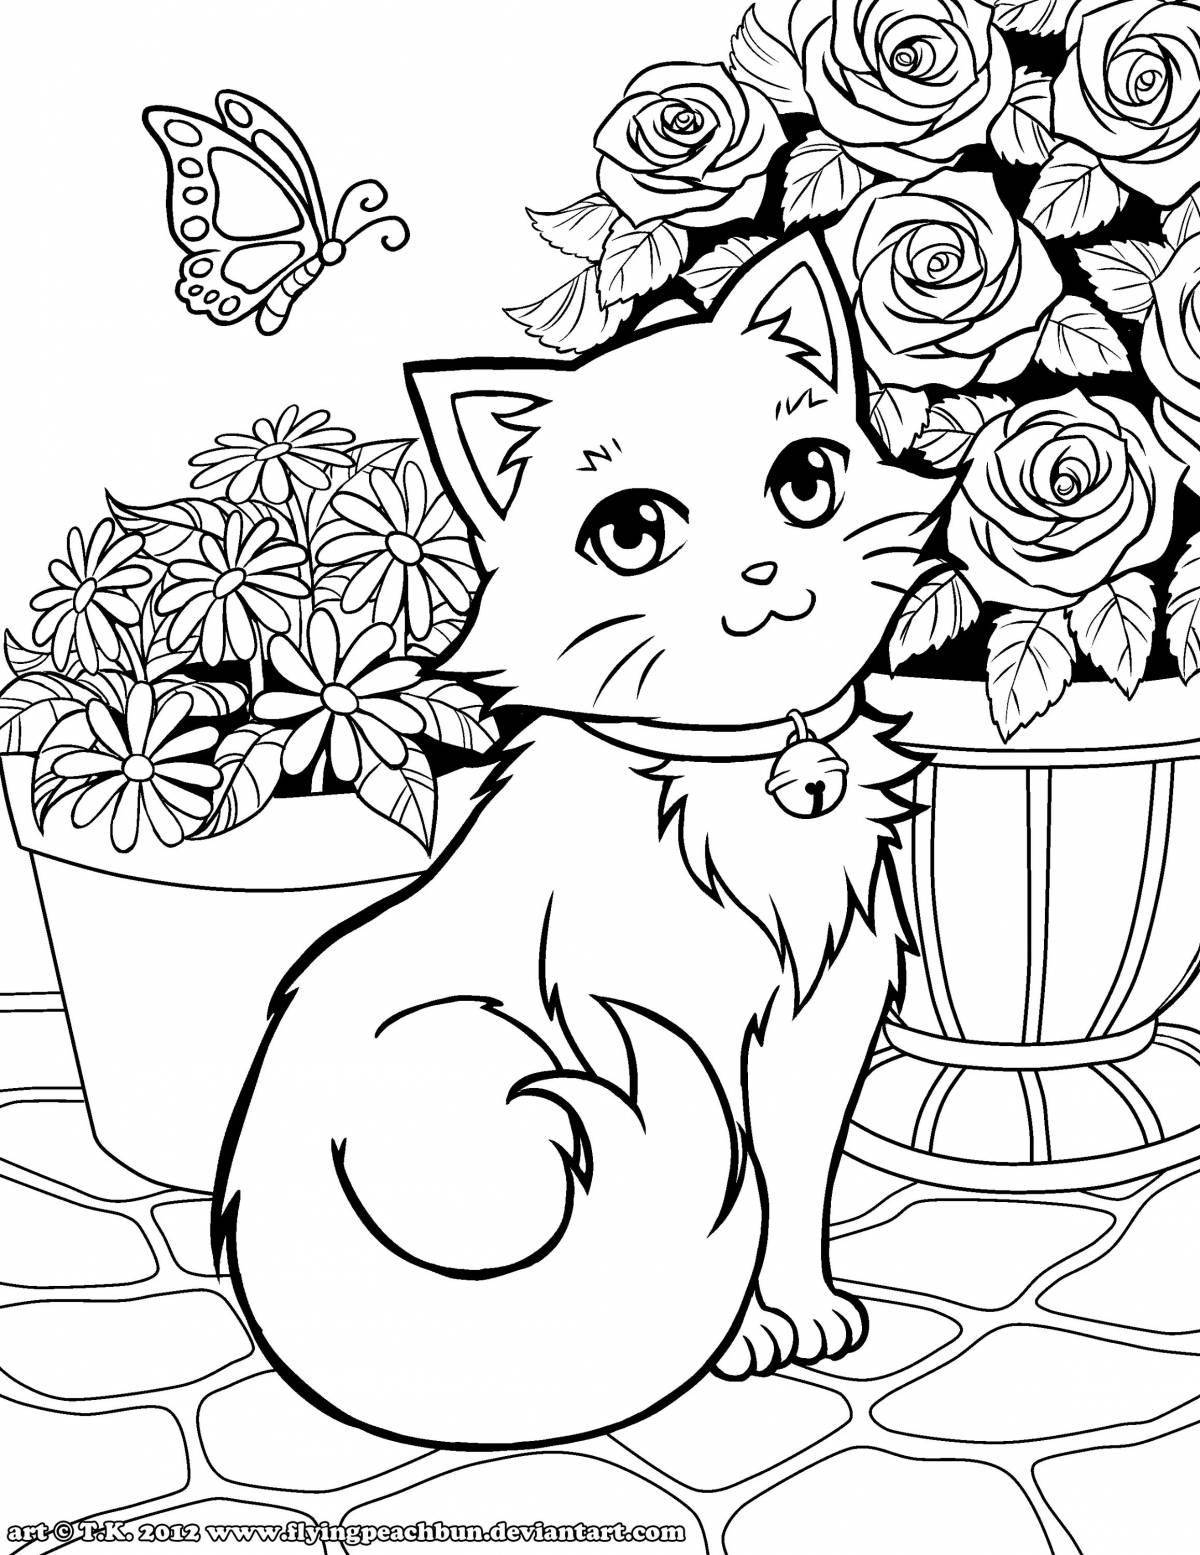 Adorable 7 year old kitten coloring book